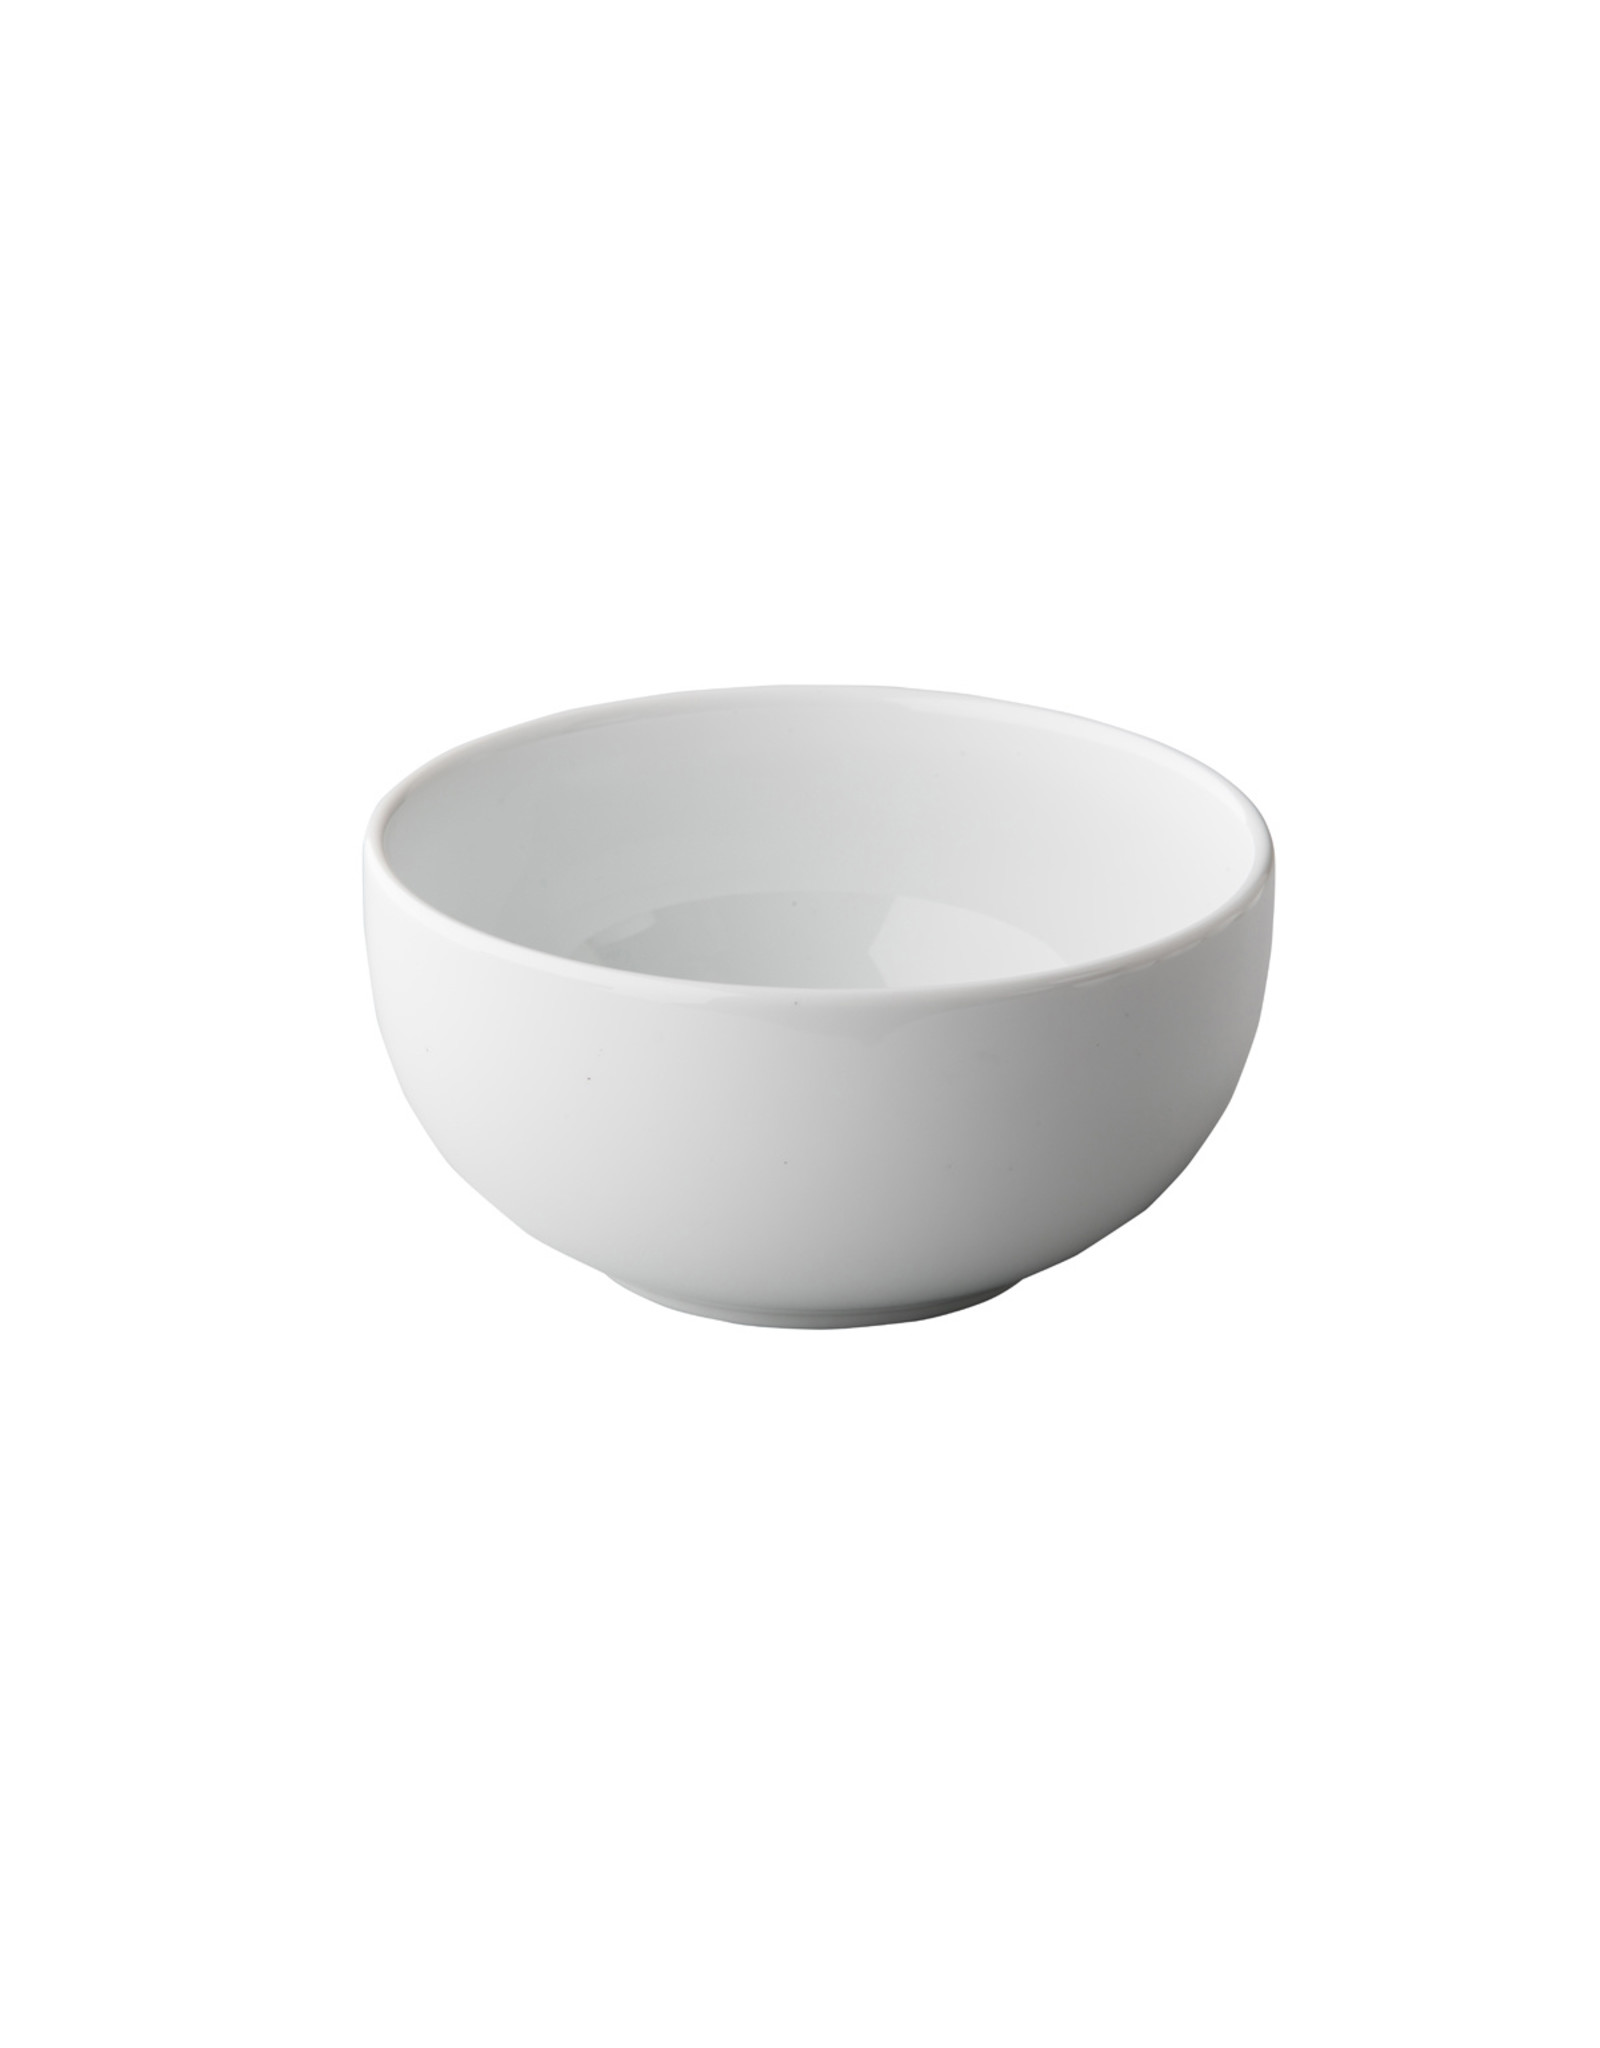 Stylepoint Q Basic Non Stackable Bowl 6.5cm